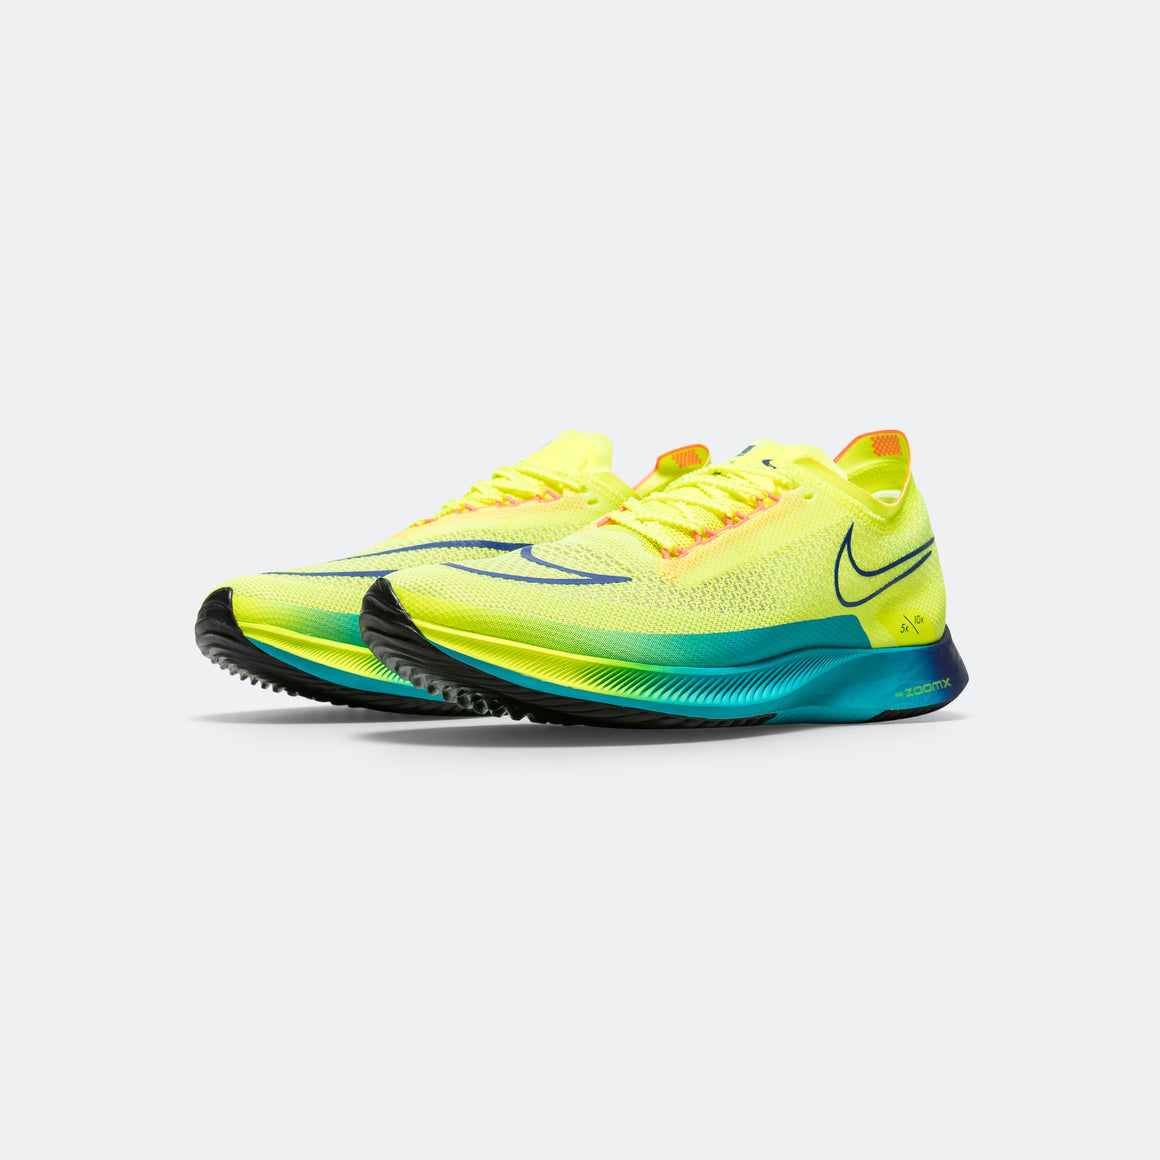 Nike - Mens ZoomX Streakfly - Volt/Black-Bright Crimson - Up There Athletics